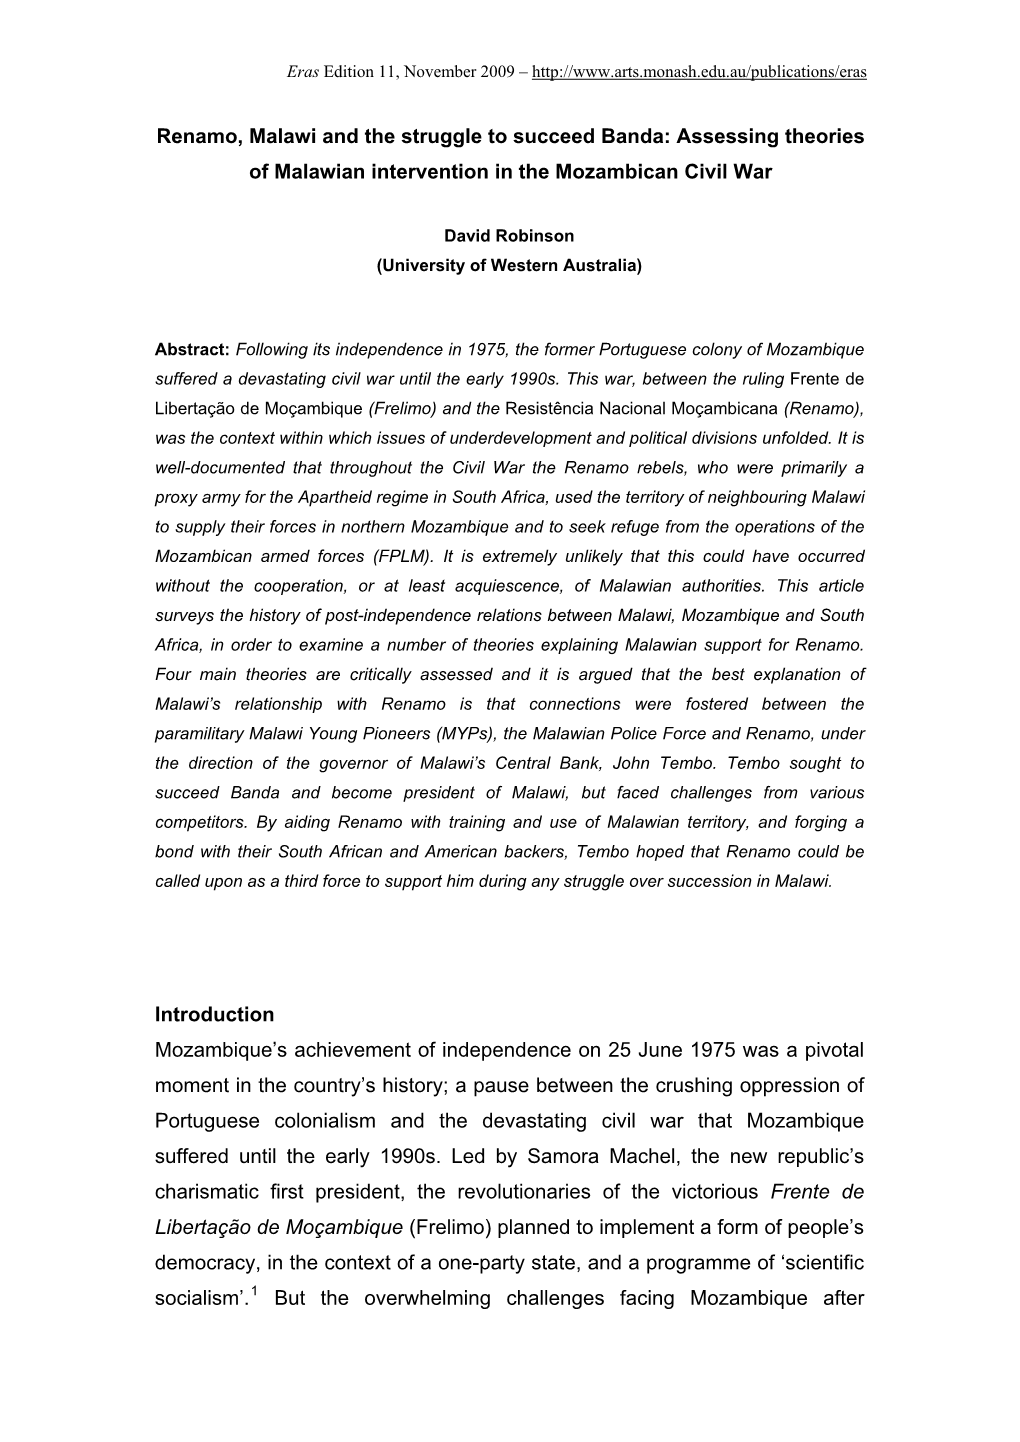 Renamo, Malawi and the Struggle to Succeed Banda: Assessing Theories of Malawian Intervention in the Mozambican Civil War